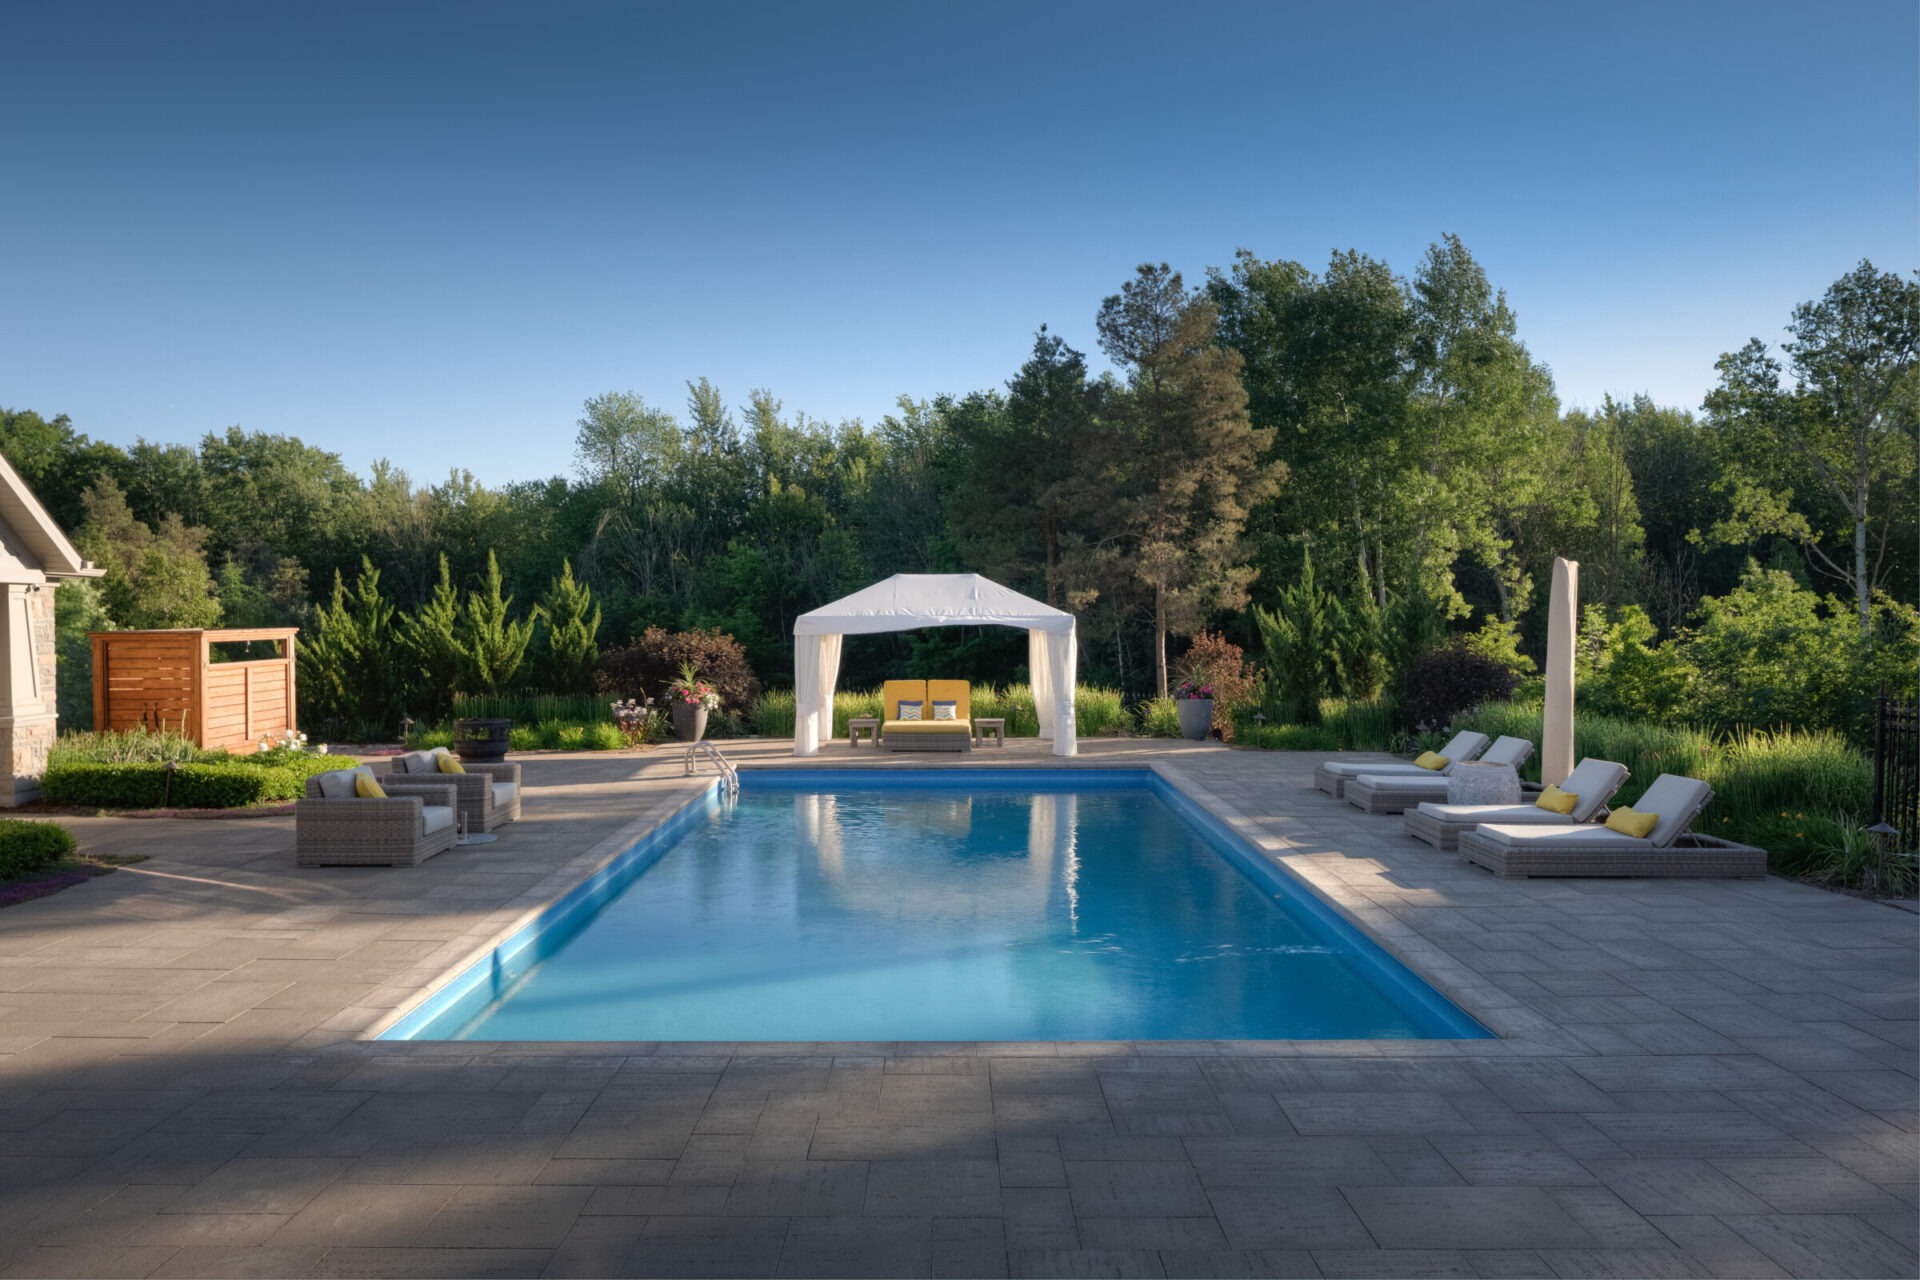 An elegant outdoor setting with a rectangular swimming pool, surrounded by lounge chairs, lush greenery, and a gazebo, under a clear blue sky.